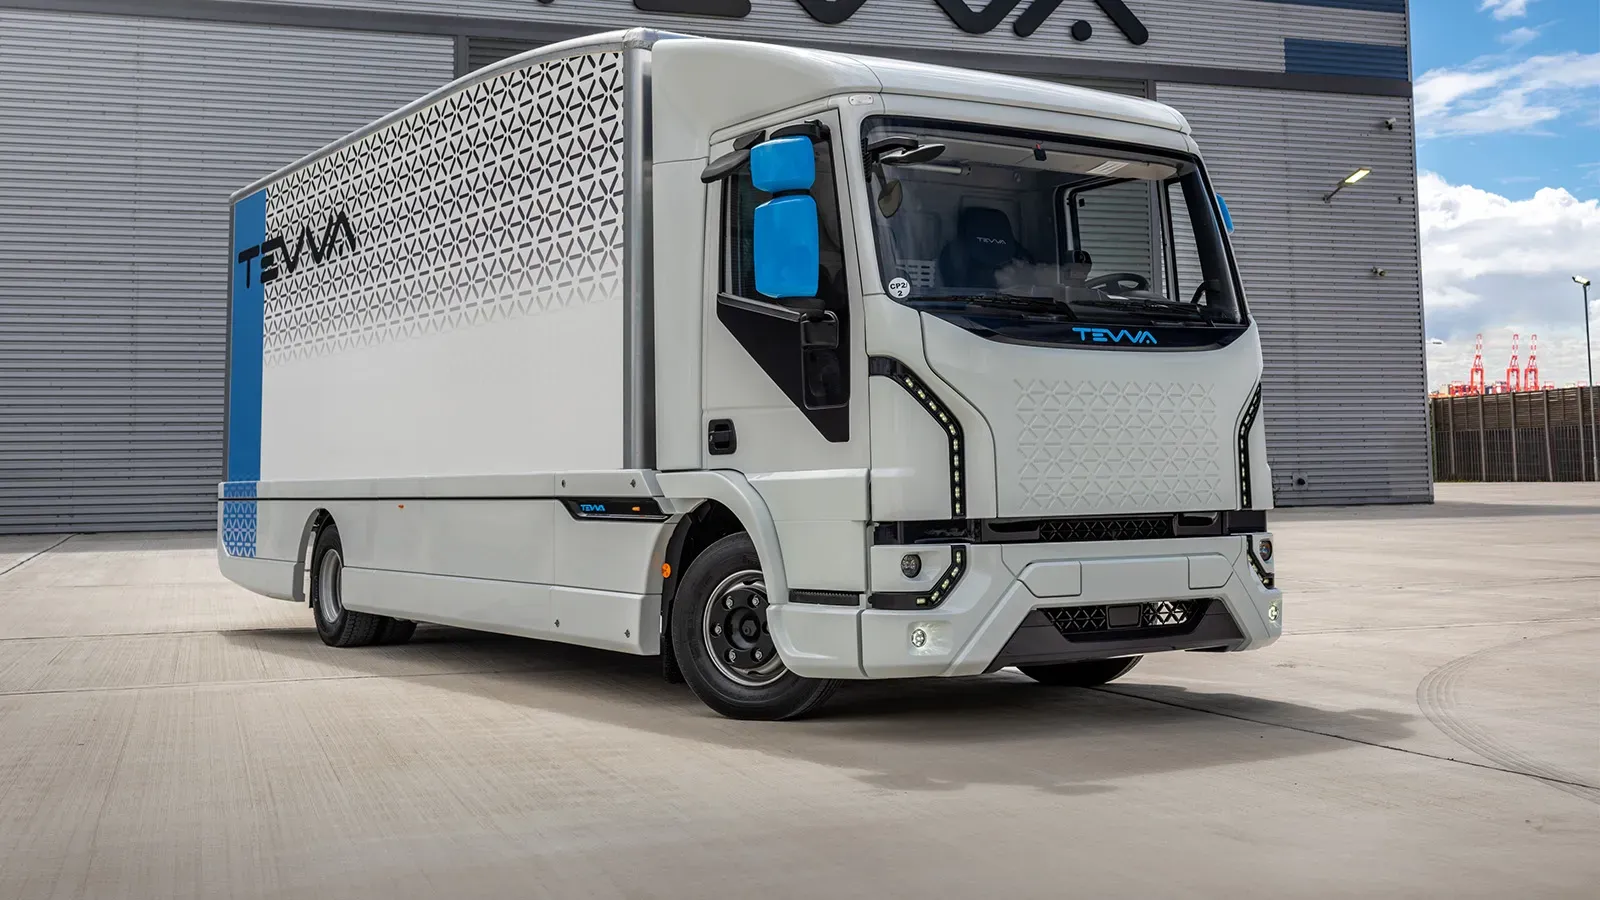 Tevva electric commercial truck